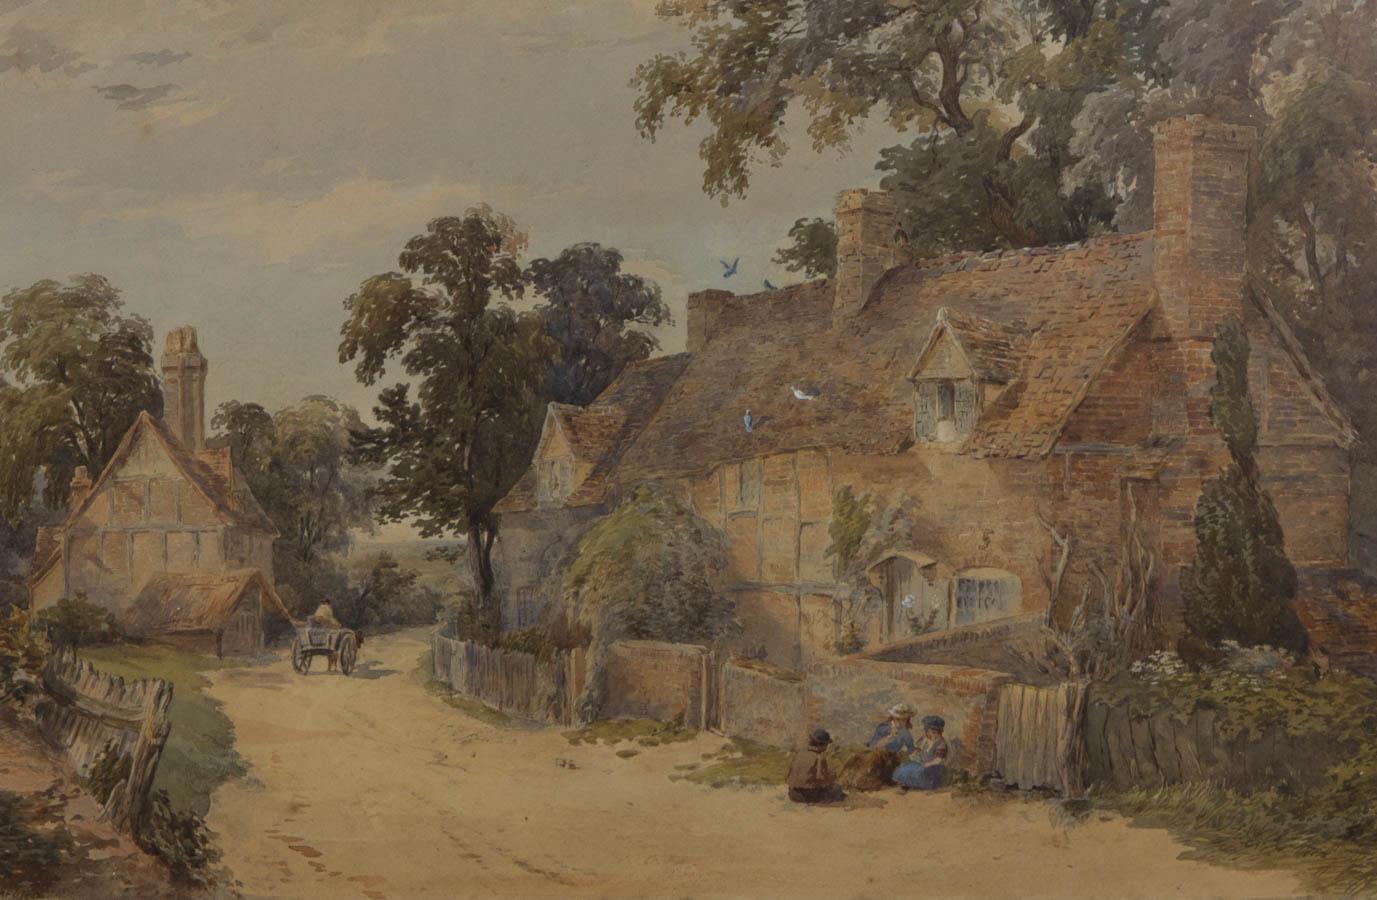 Lawrence George Bomford (1847-1926) - Watercolour, Village Scene with Horse Cart - Art by Unknown